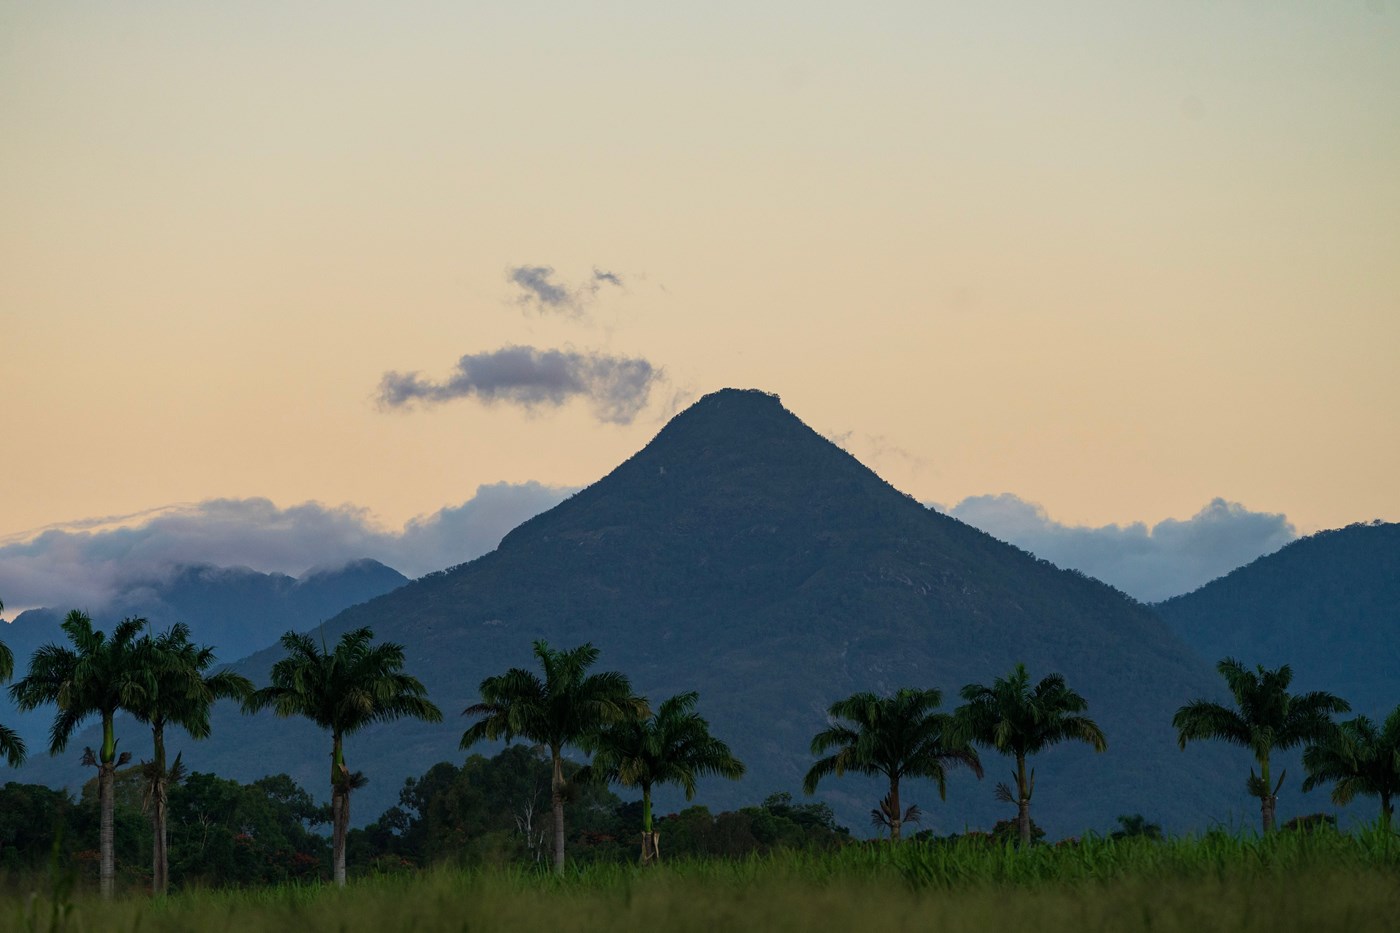 A far off view of a pyramid shaped mountain with palm trees in the foregound